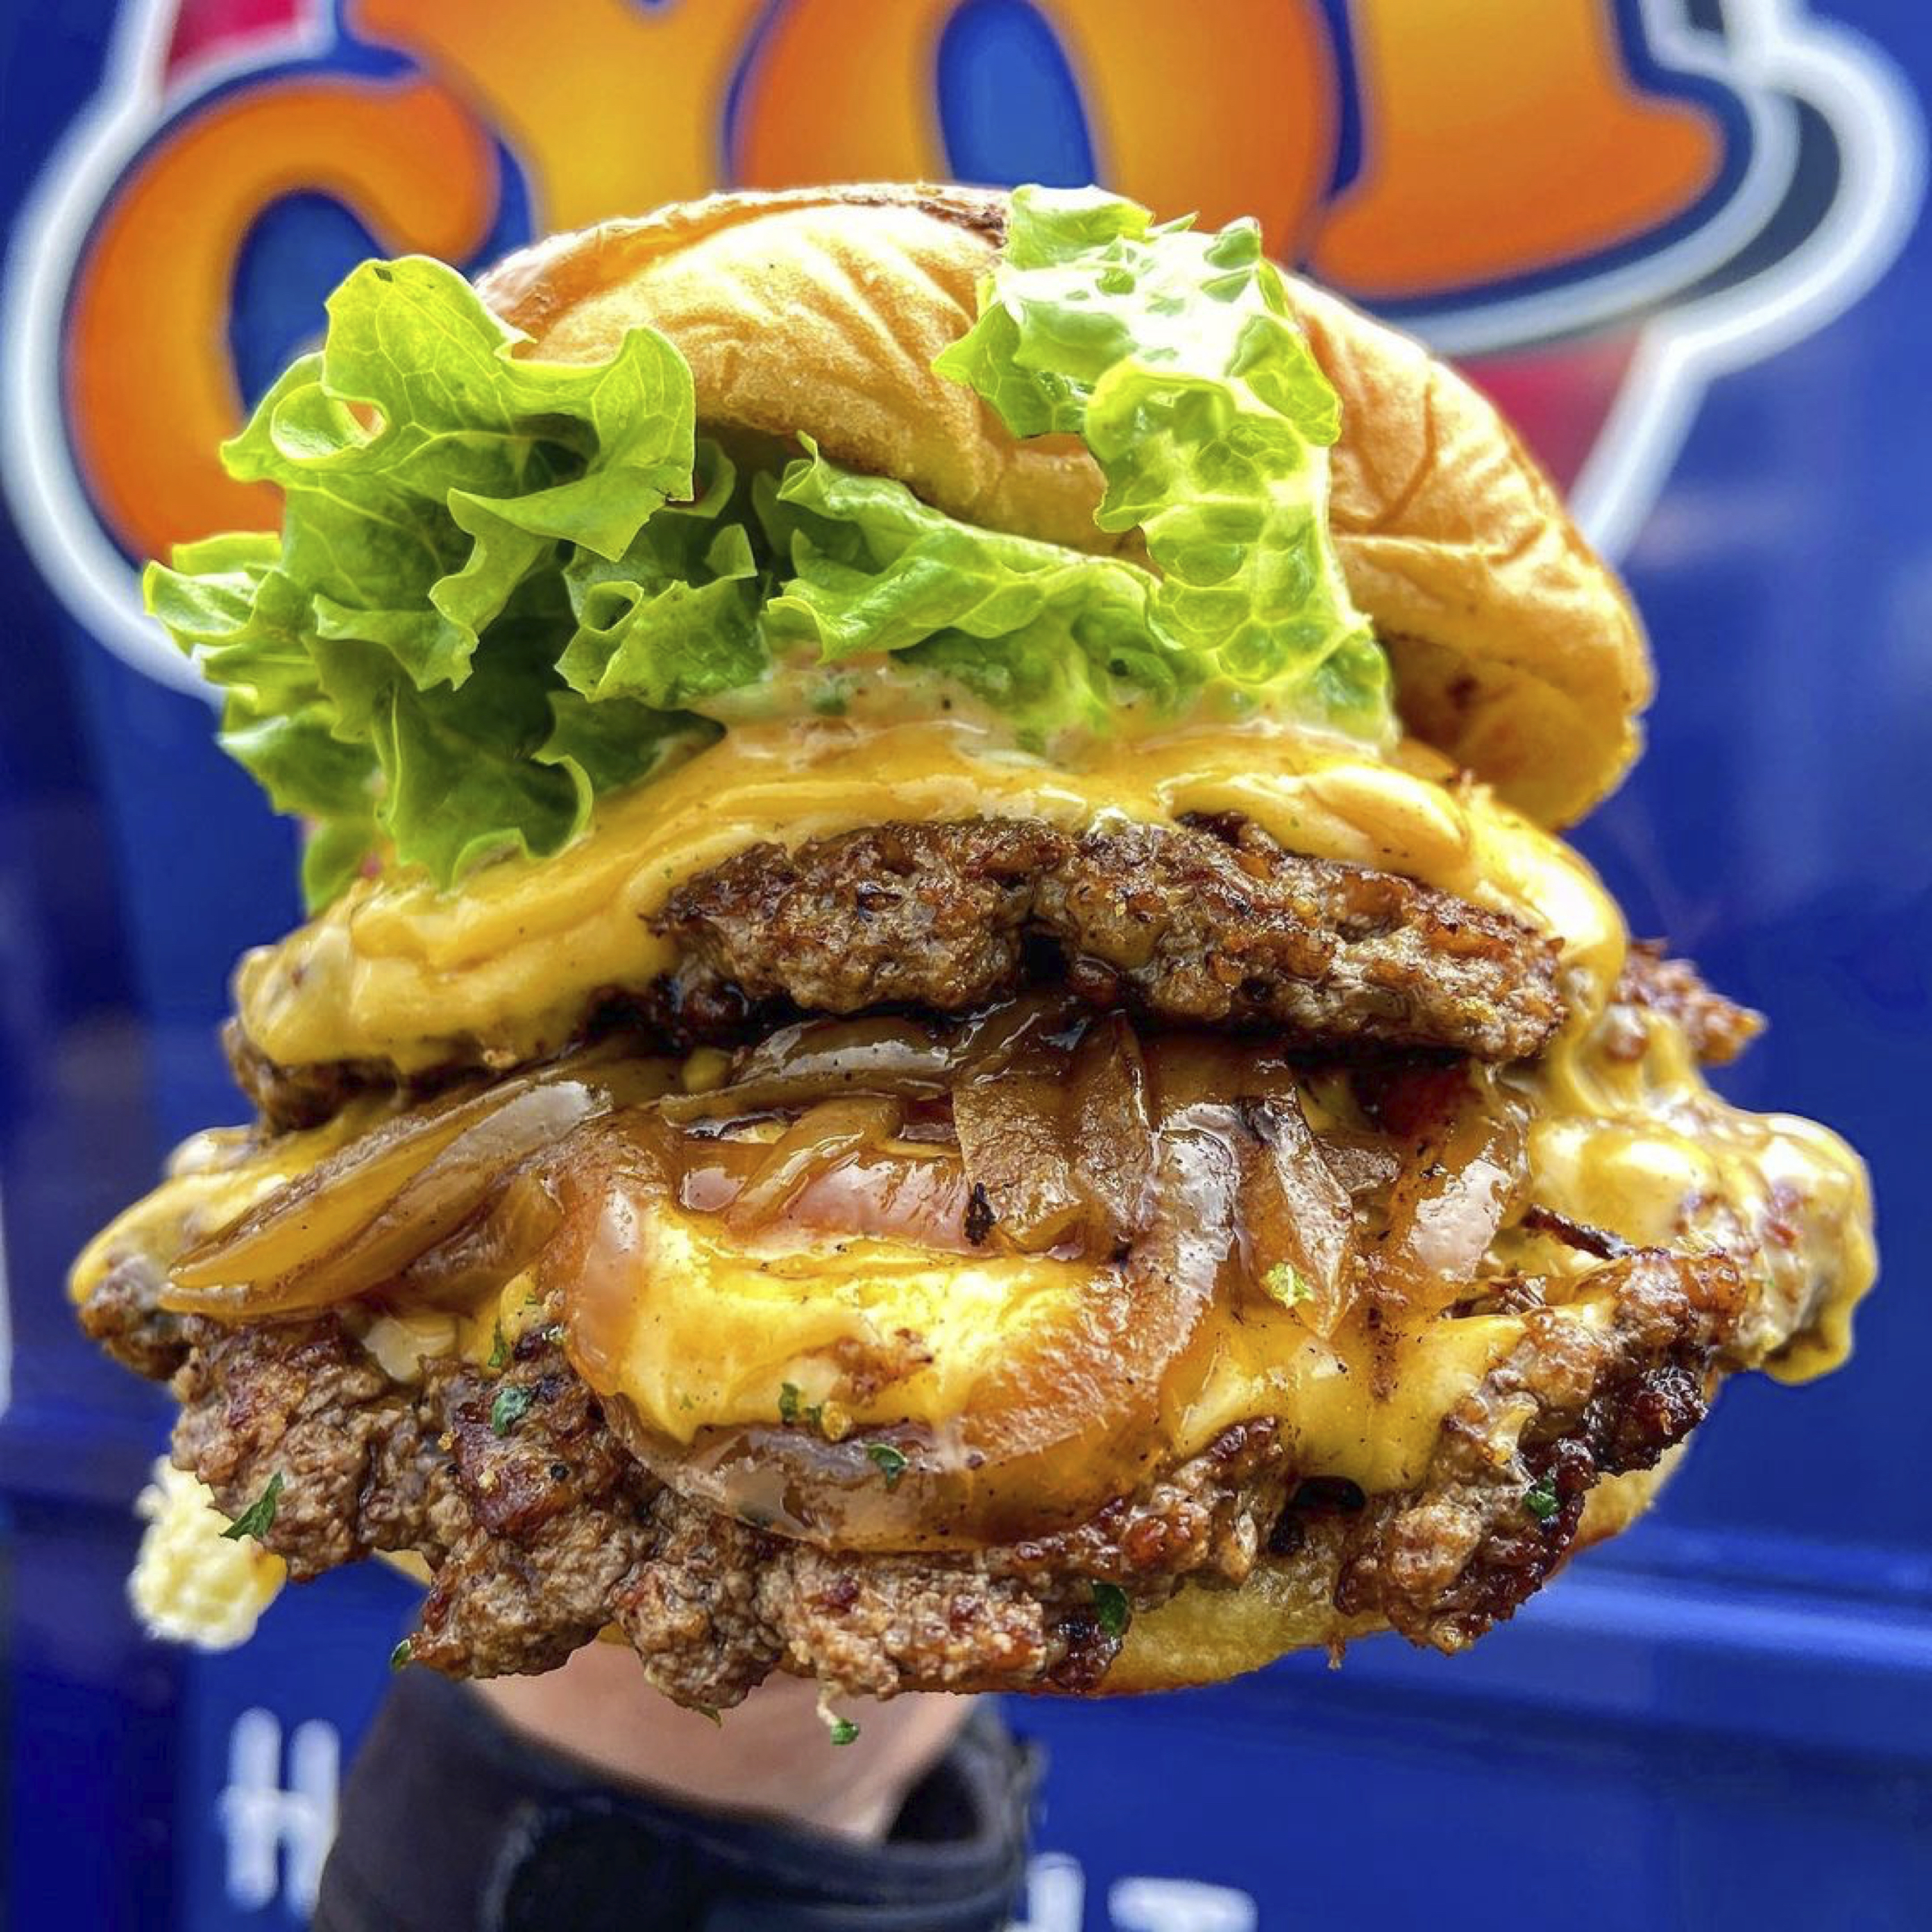 Cheeseburger with melted cheese and lettuce